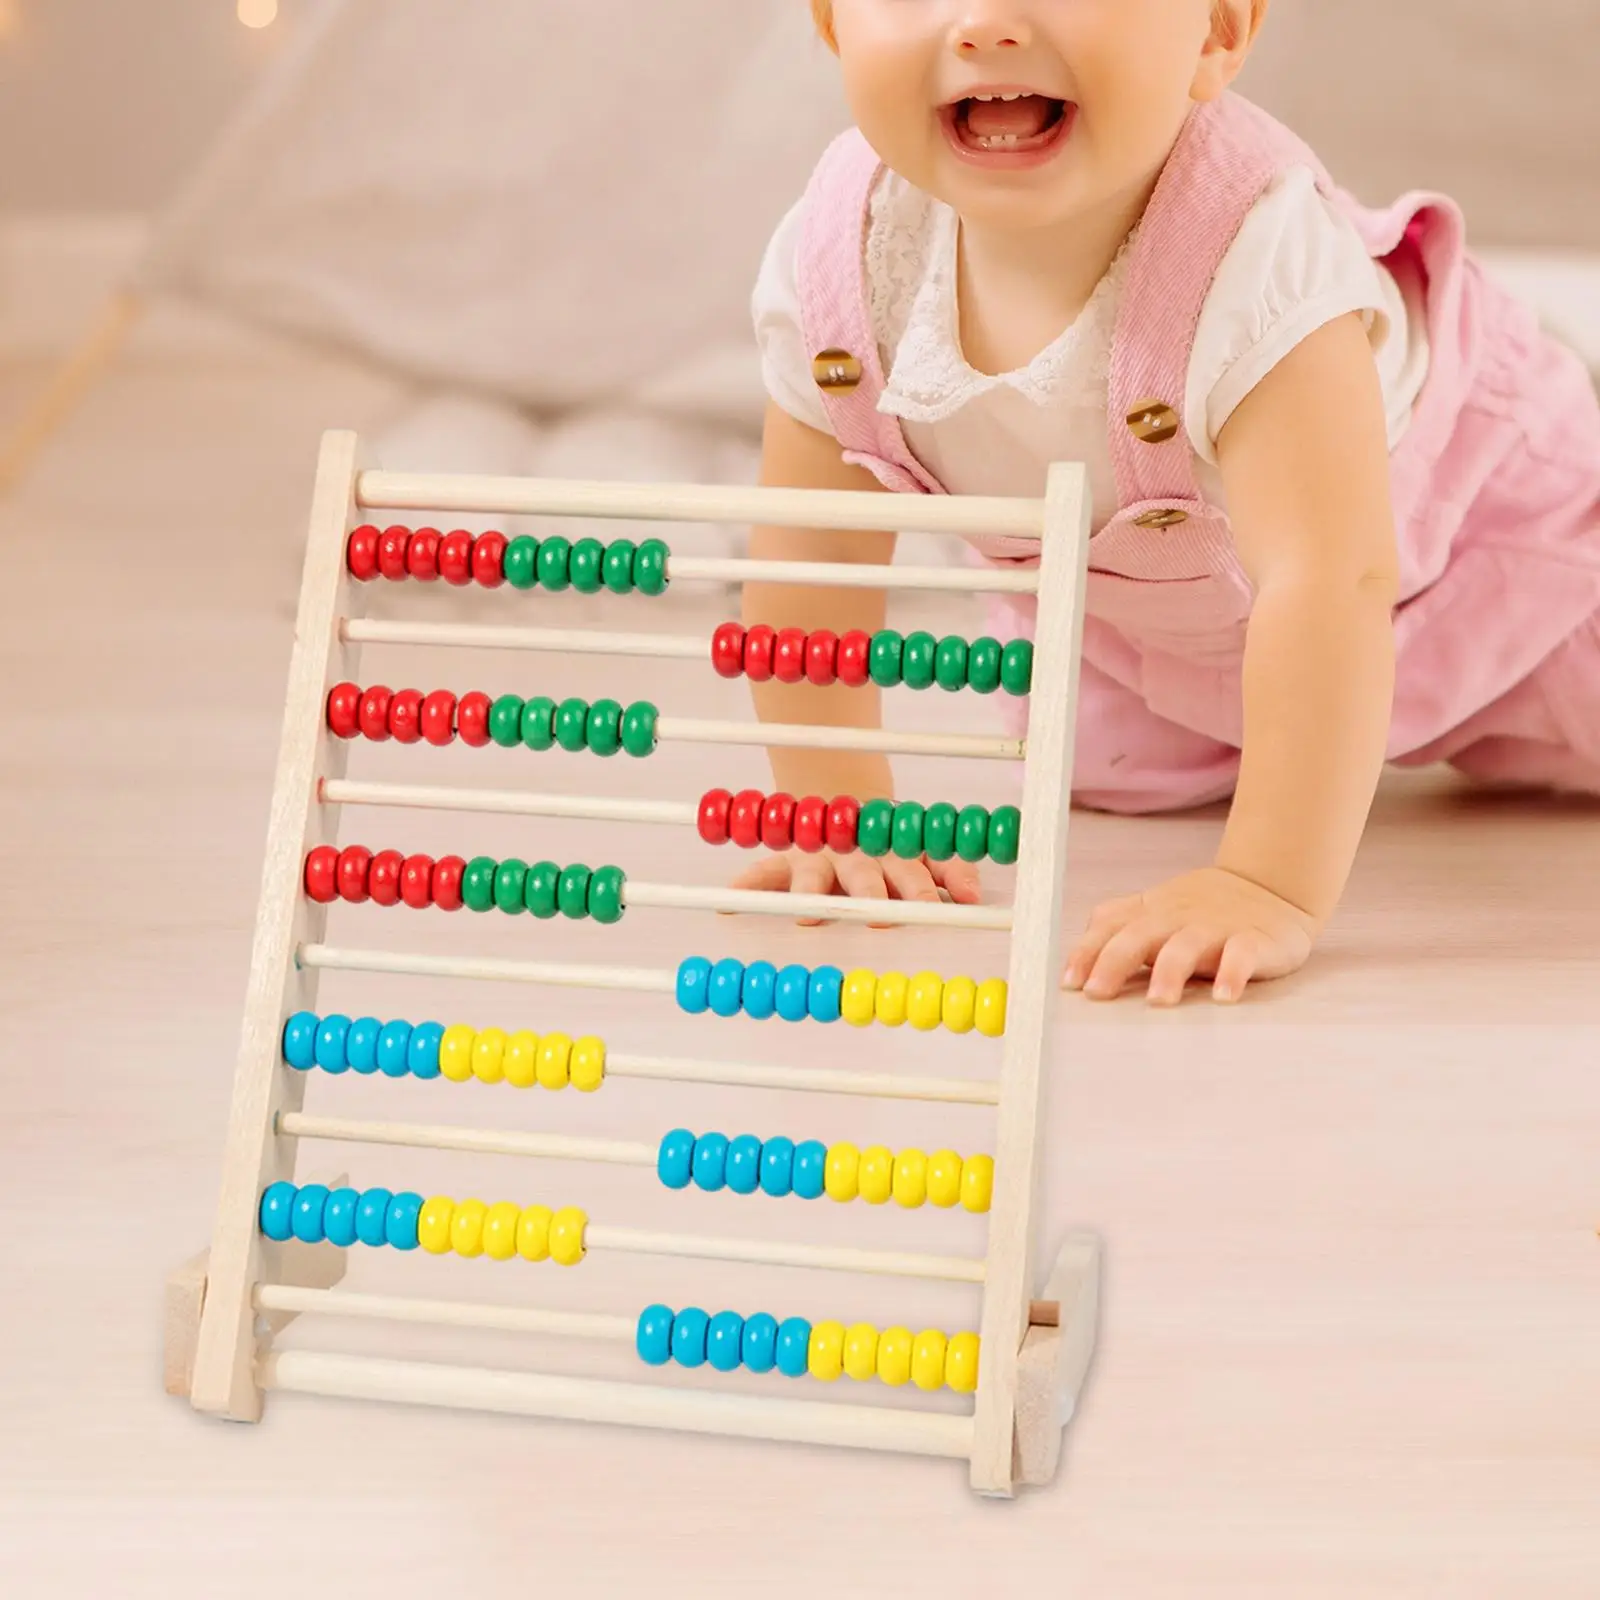 10 Row Wooden Counting Frame Abacus Early Childhood Education Math Number Games Addition and Subtraction for Elementary Kids